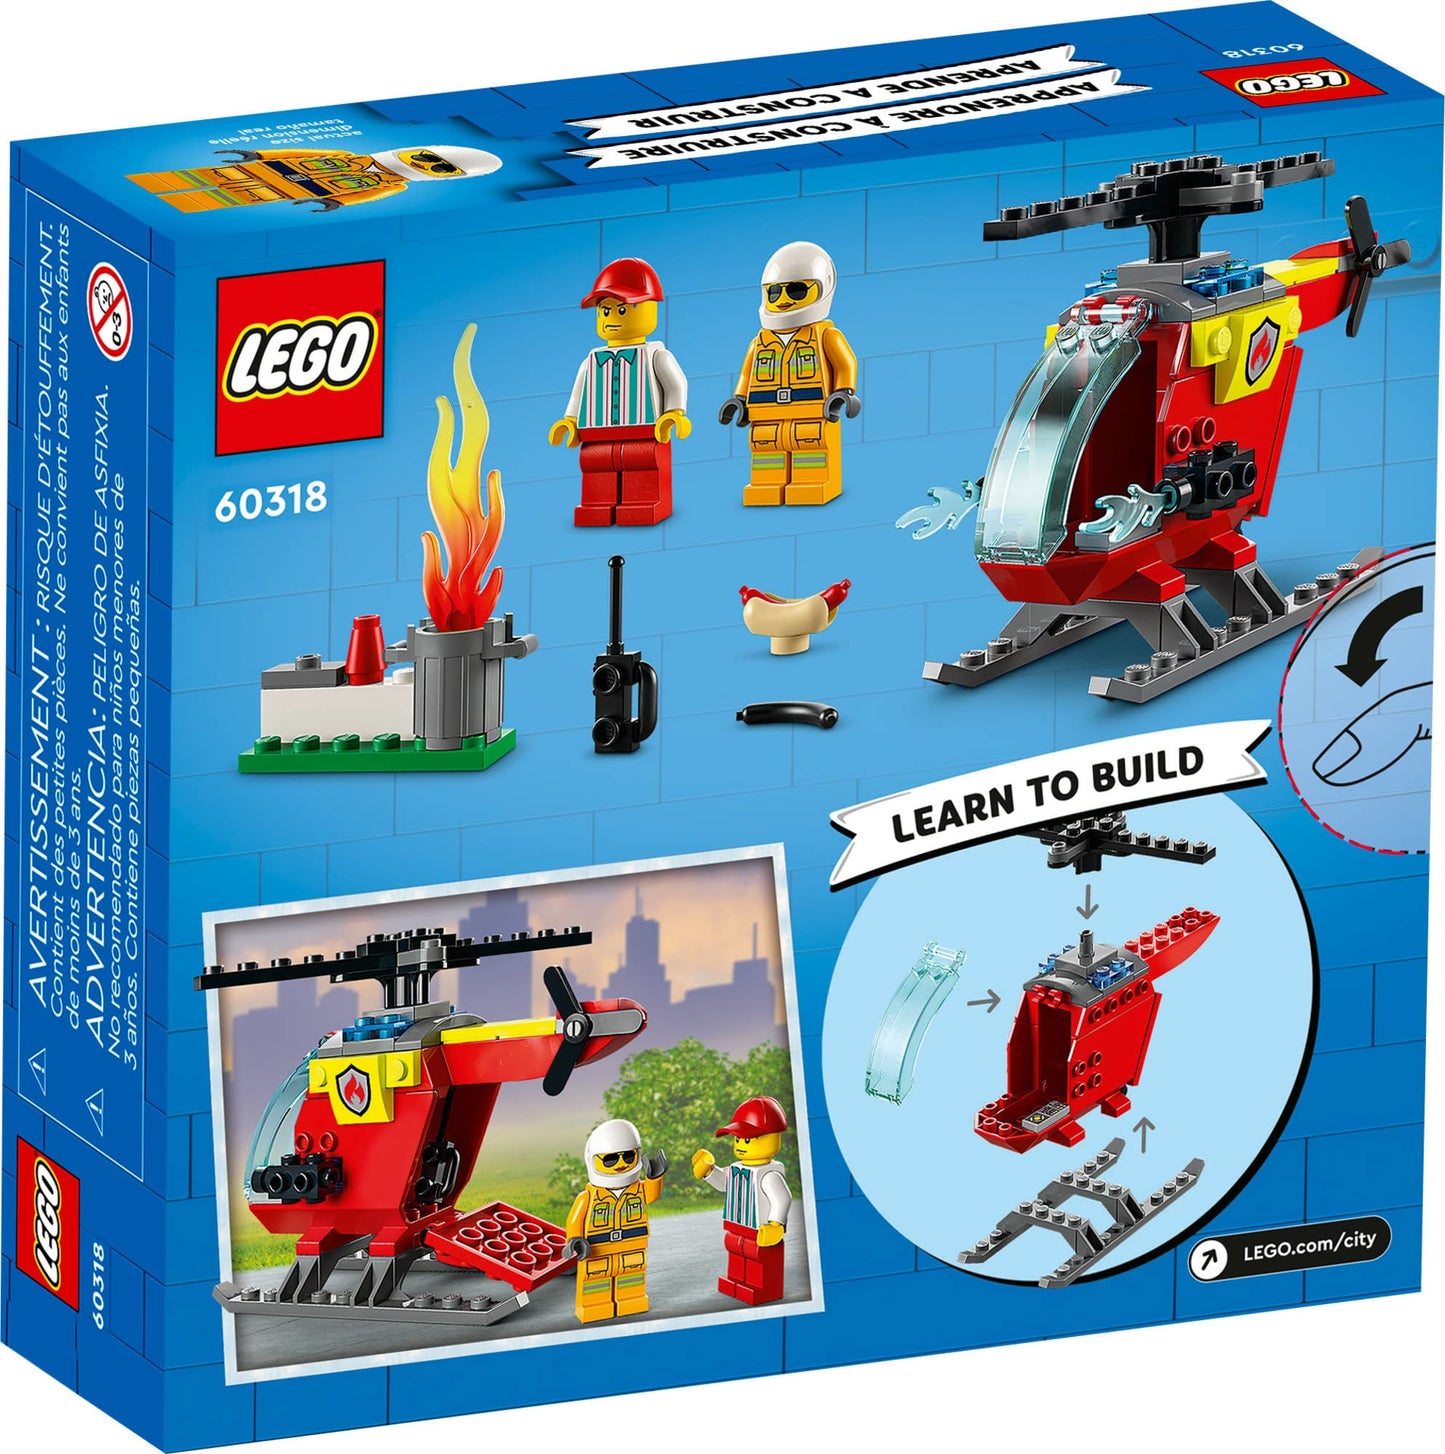 LEGO City Fire Helicopter Toy 60318 for Preschool Kids, Boys and Girls 4 Plus Years Old, with Firefighter Minifigure & Starter Brick